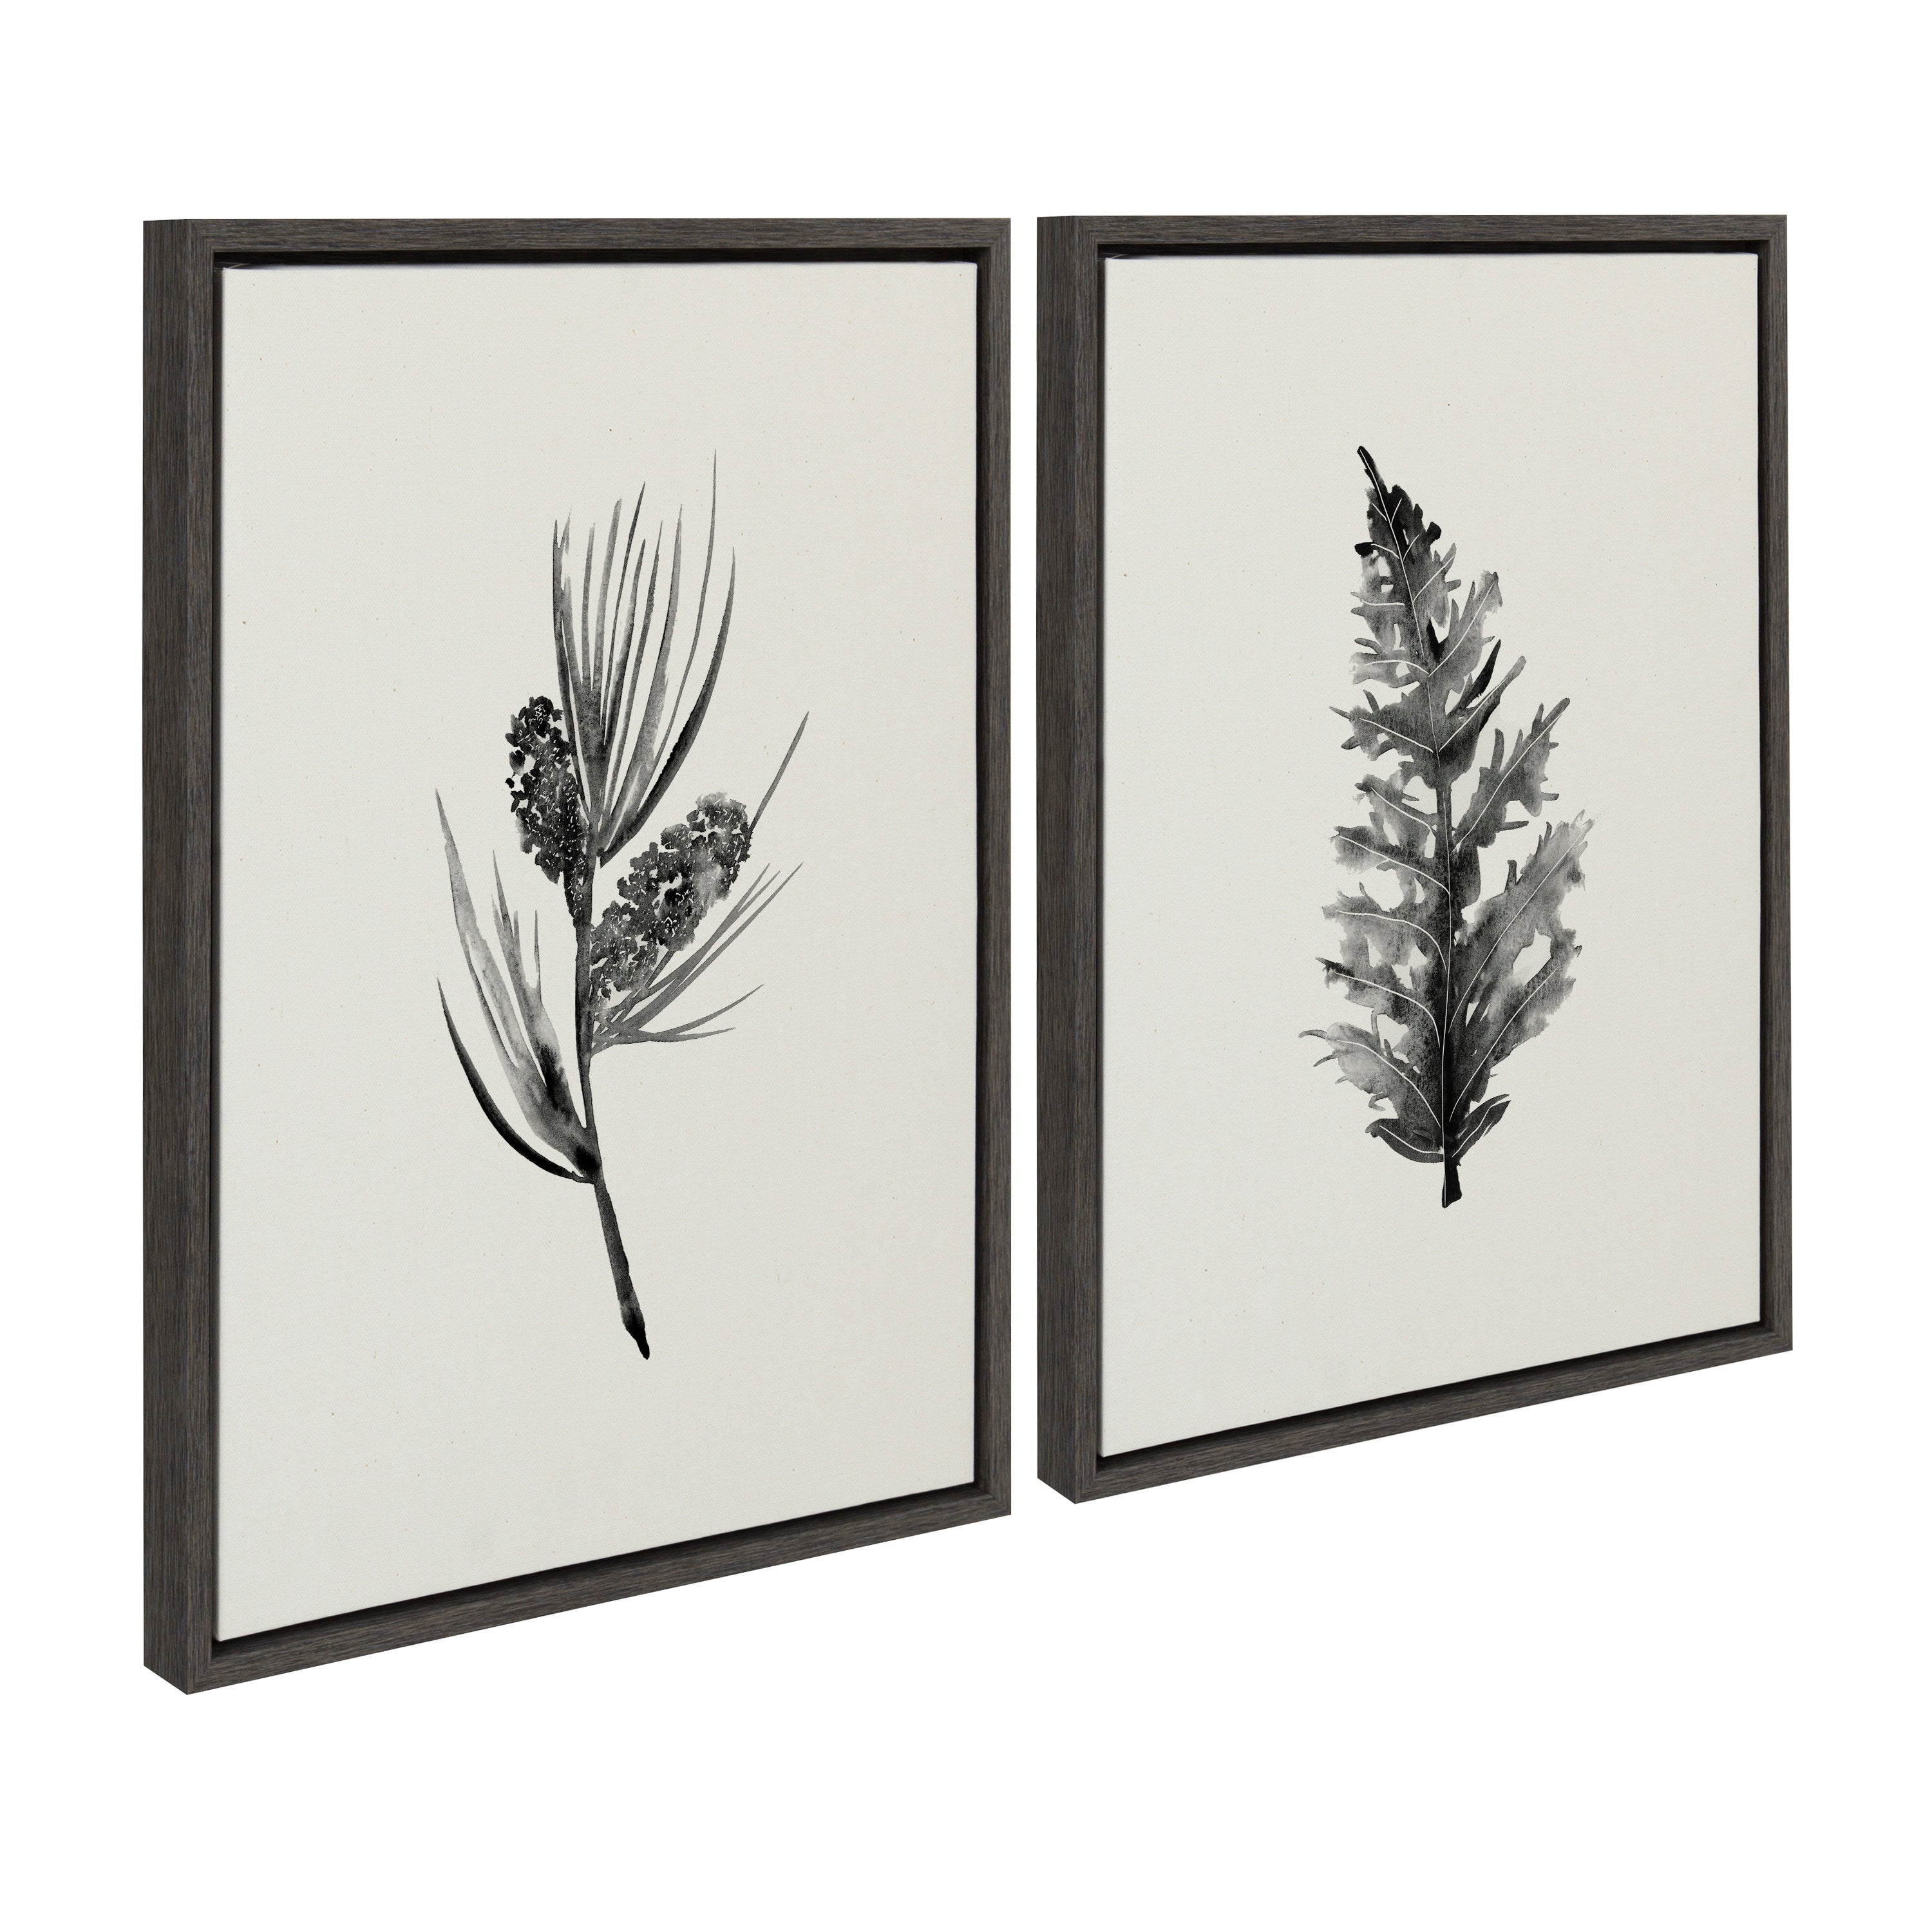 Sylvie Vintage Botanical 3 and 4 Framed Canvas Set by Teju Reval of SnazzyHues